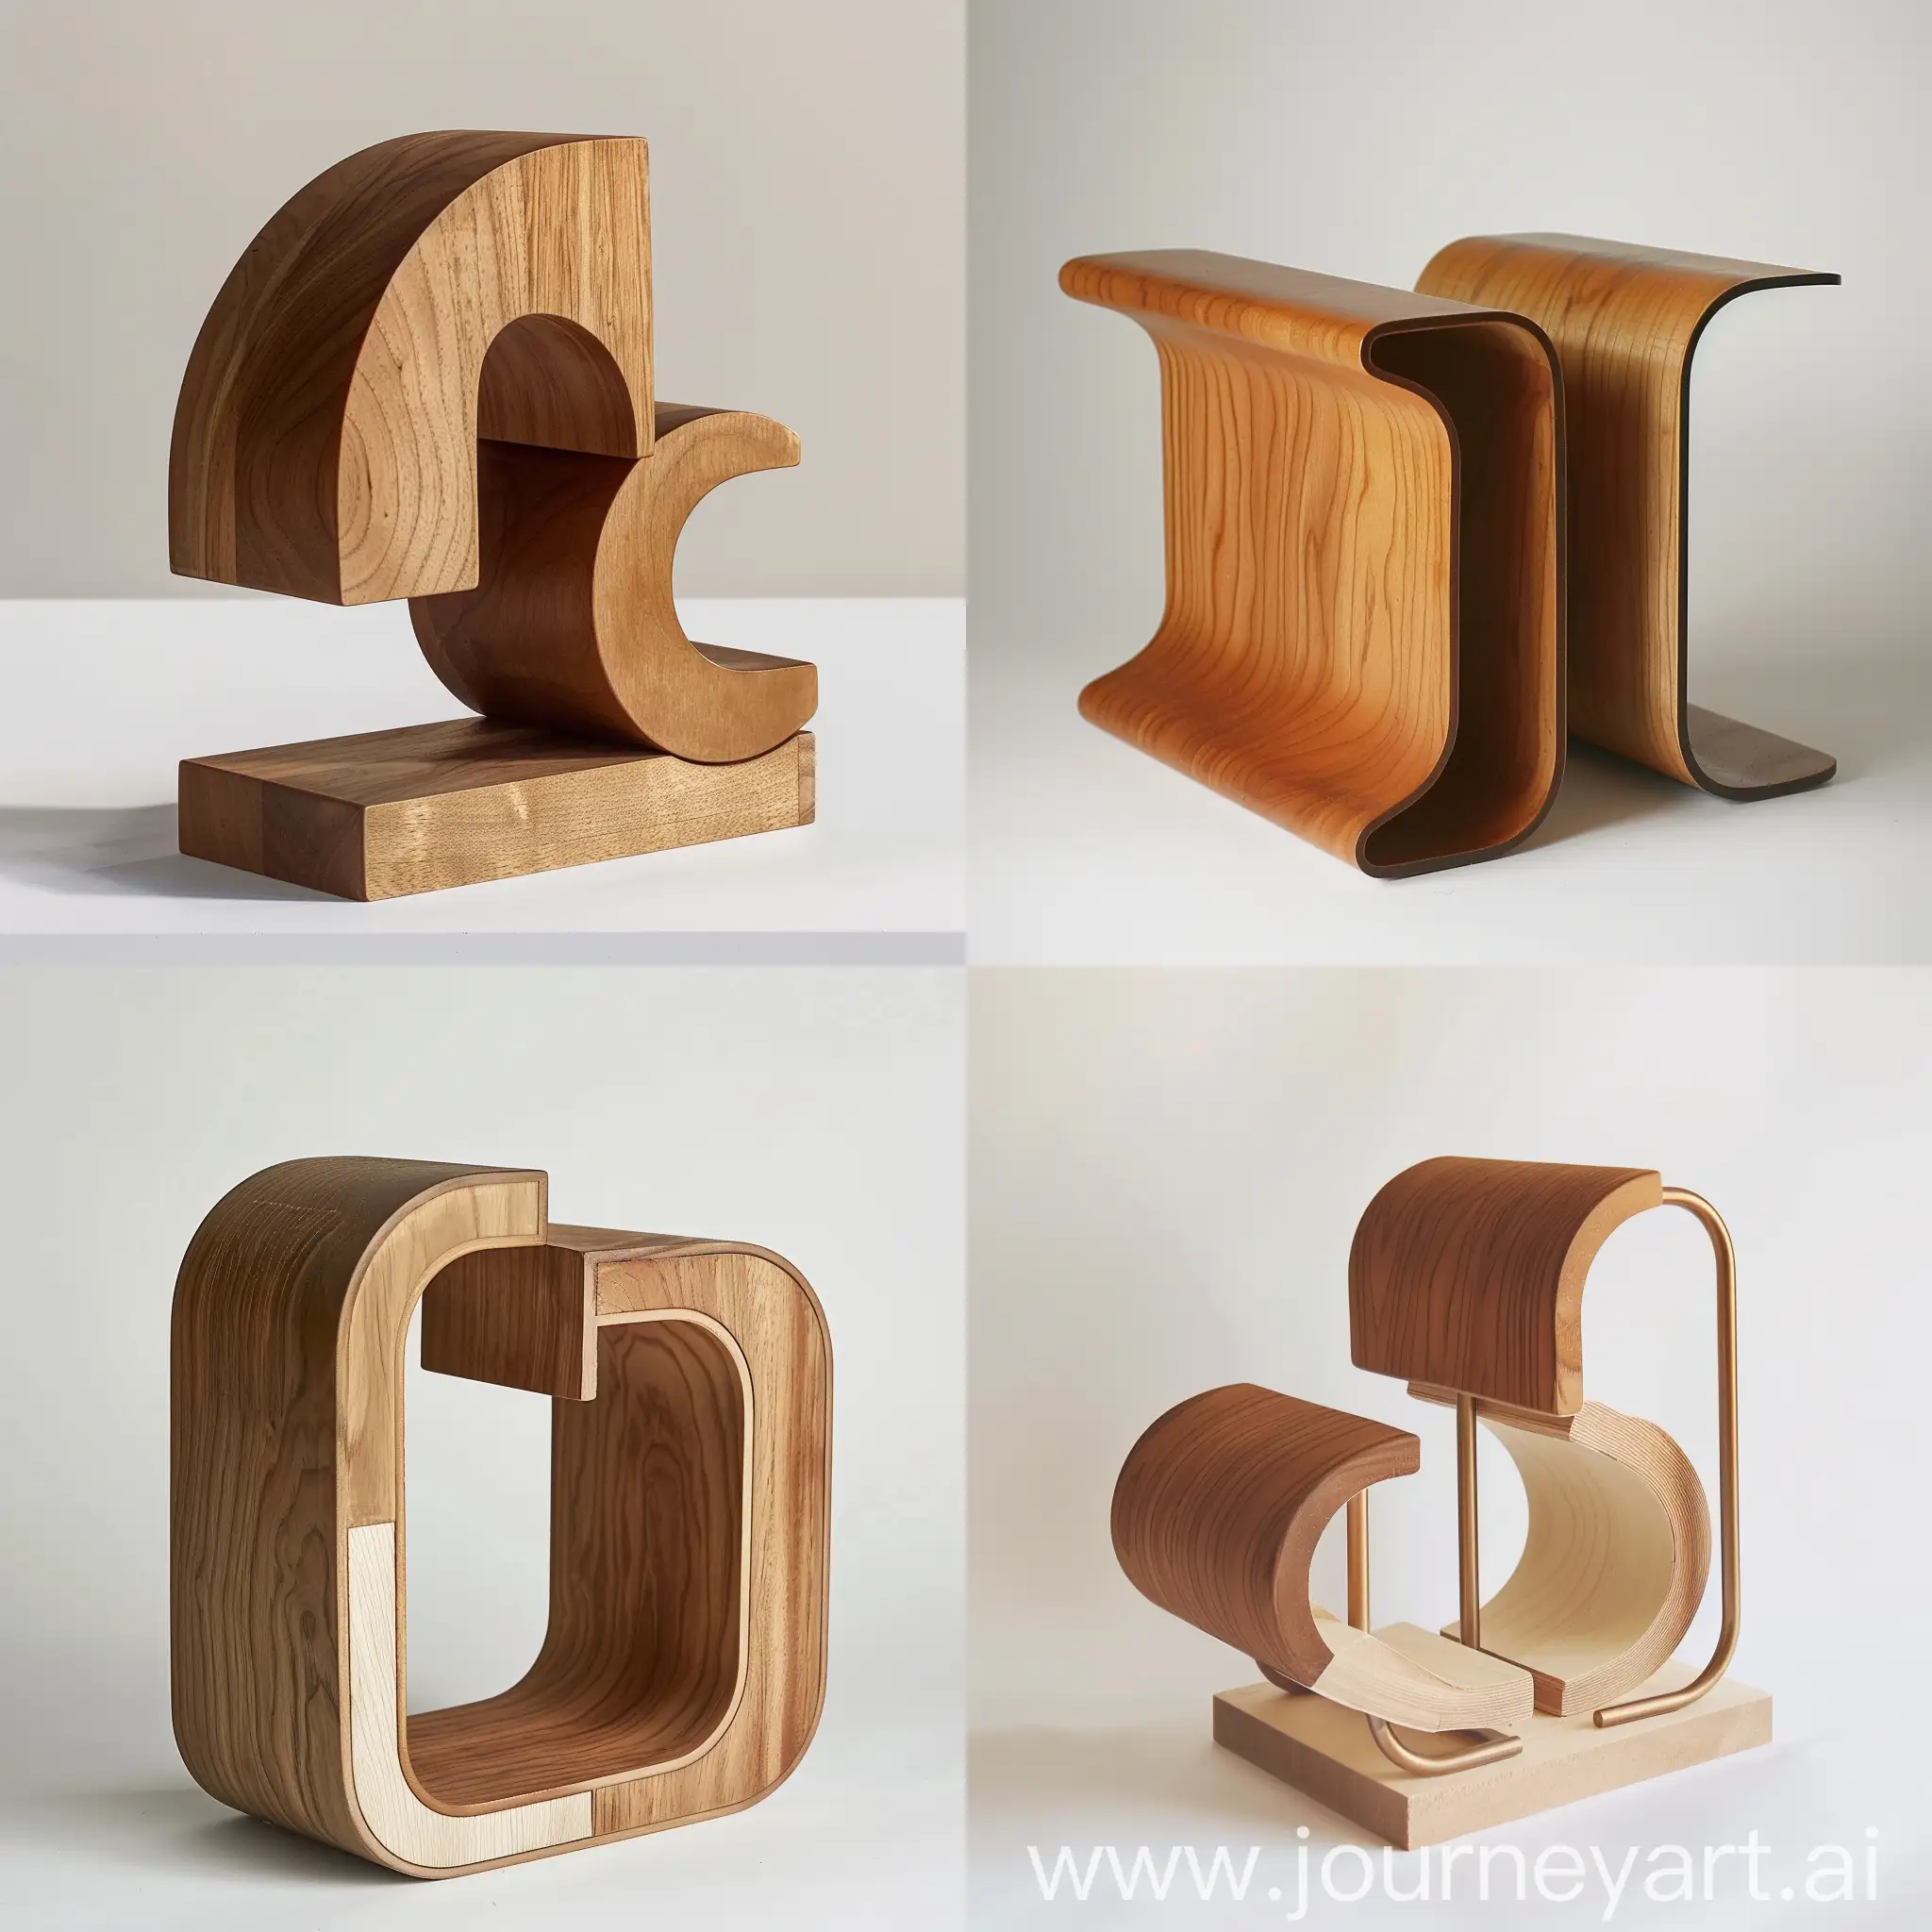 Generate an image of a mid-century modern style bookend, drawing inspiration from George Nelson's design aesthetics. The bookend should embody minimalism, featuring clean lines and organic forms. Construct it from either natural wood or bent tubular steel, ensuring the steel is unpainted to highlight its sleek, industrial look. The design should prioritize functionality while maintaining a timeless and sophisticated appearance